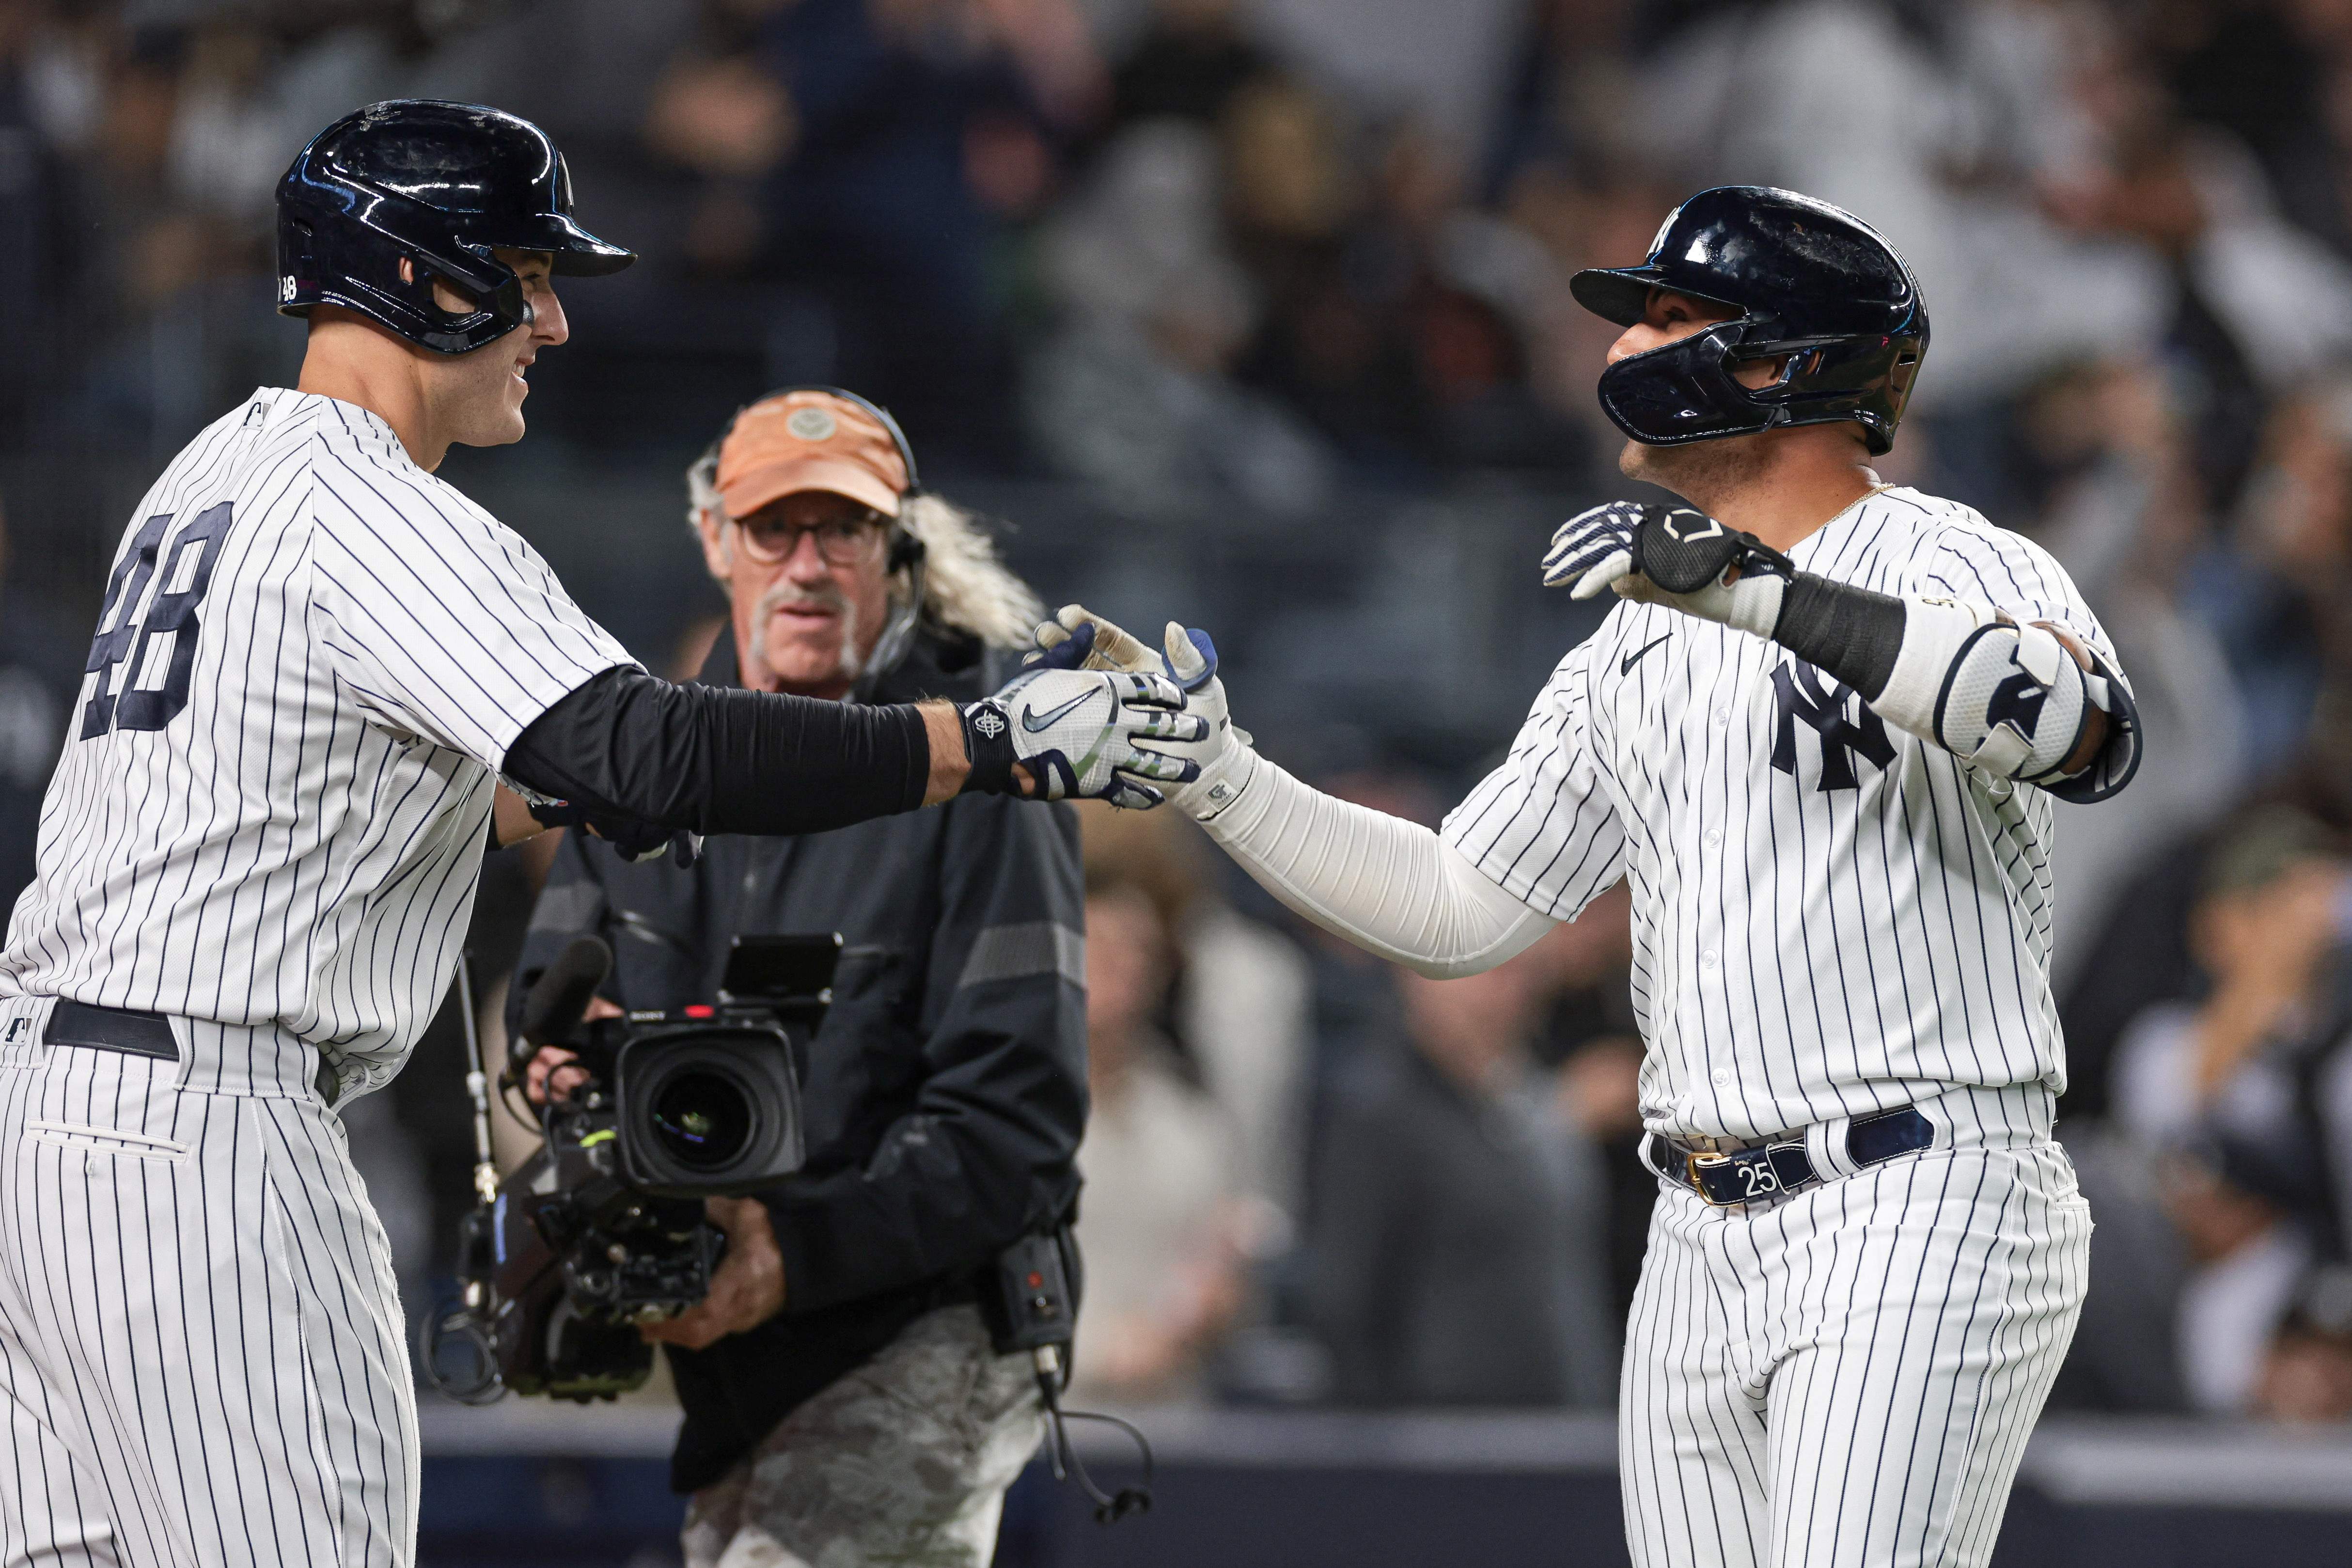 New York Yankees: Will the real Gleyber Torres please stand up?